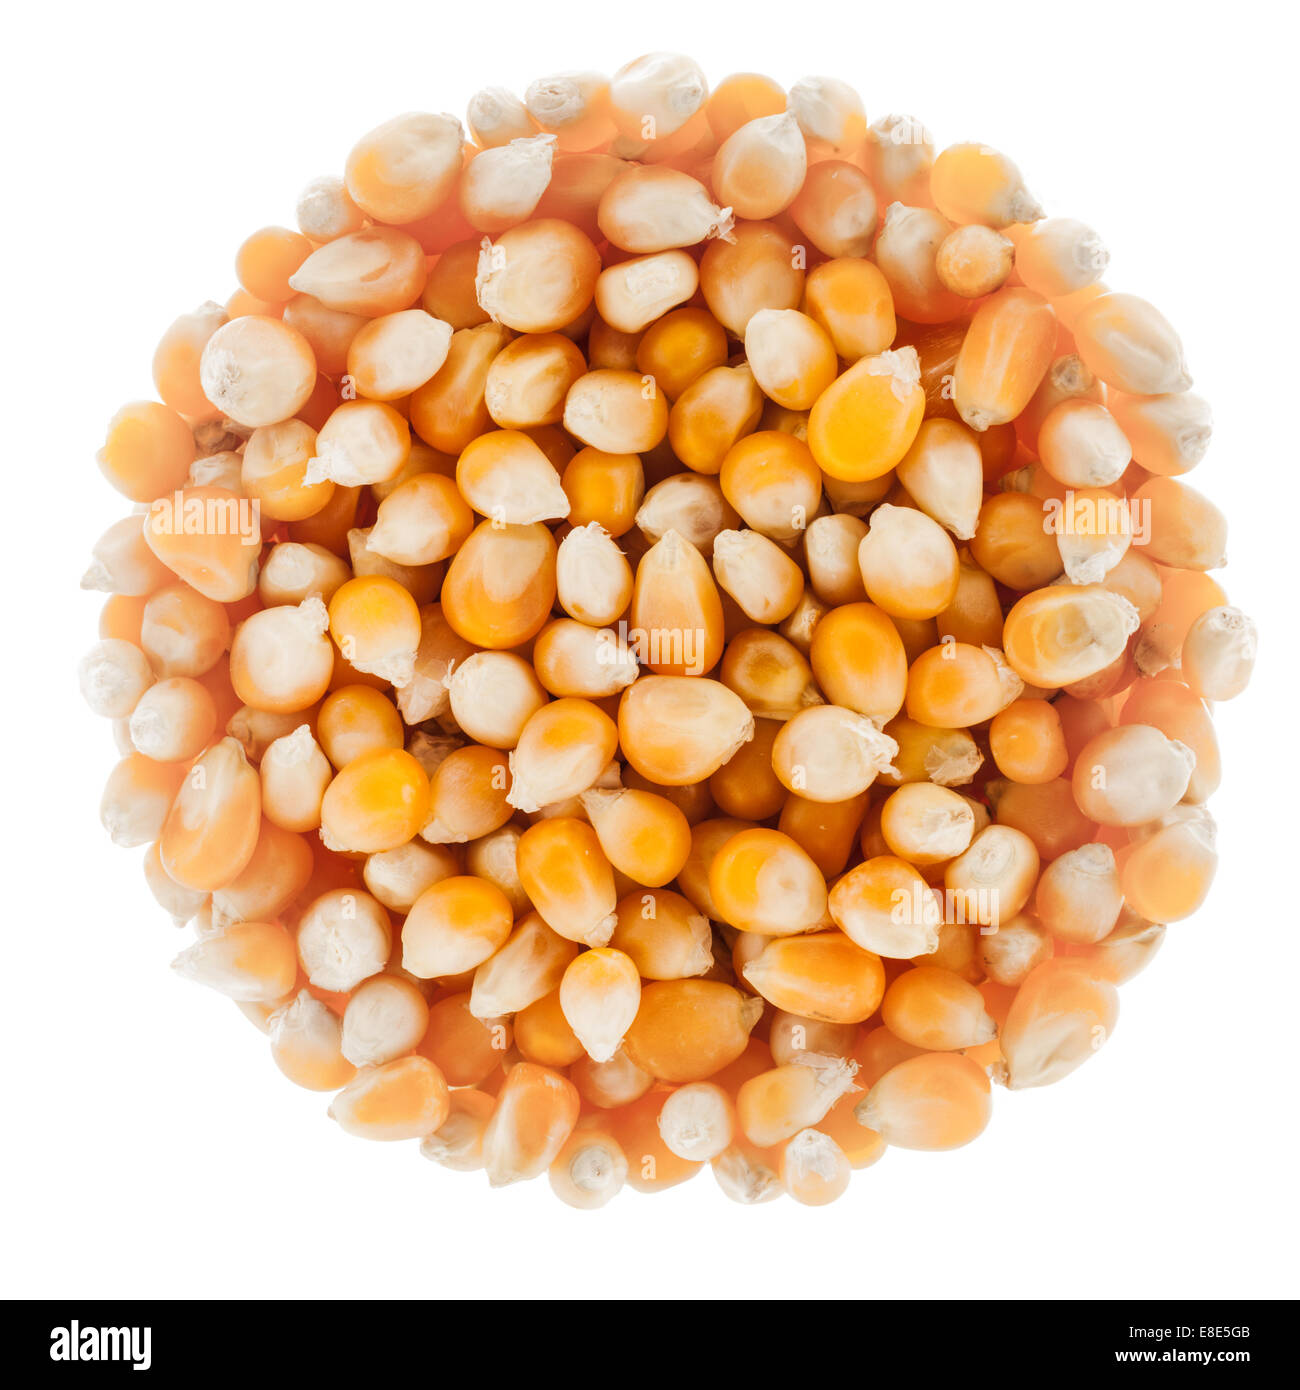 Perfect Circle of Unpoped Corn Seeds Isolated on White Background Stock Photo